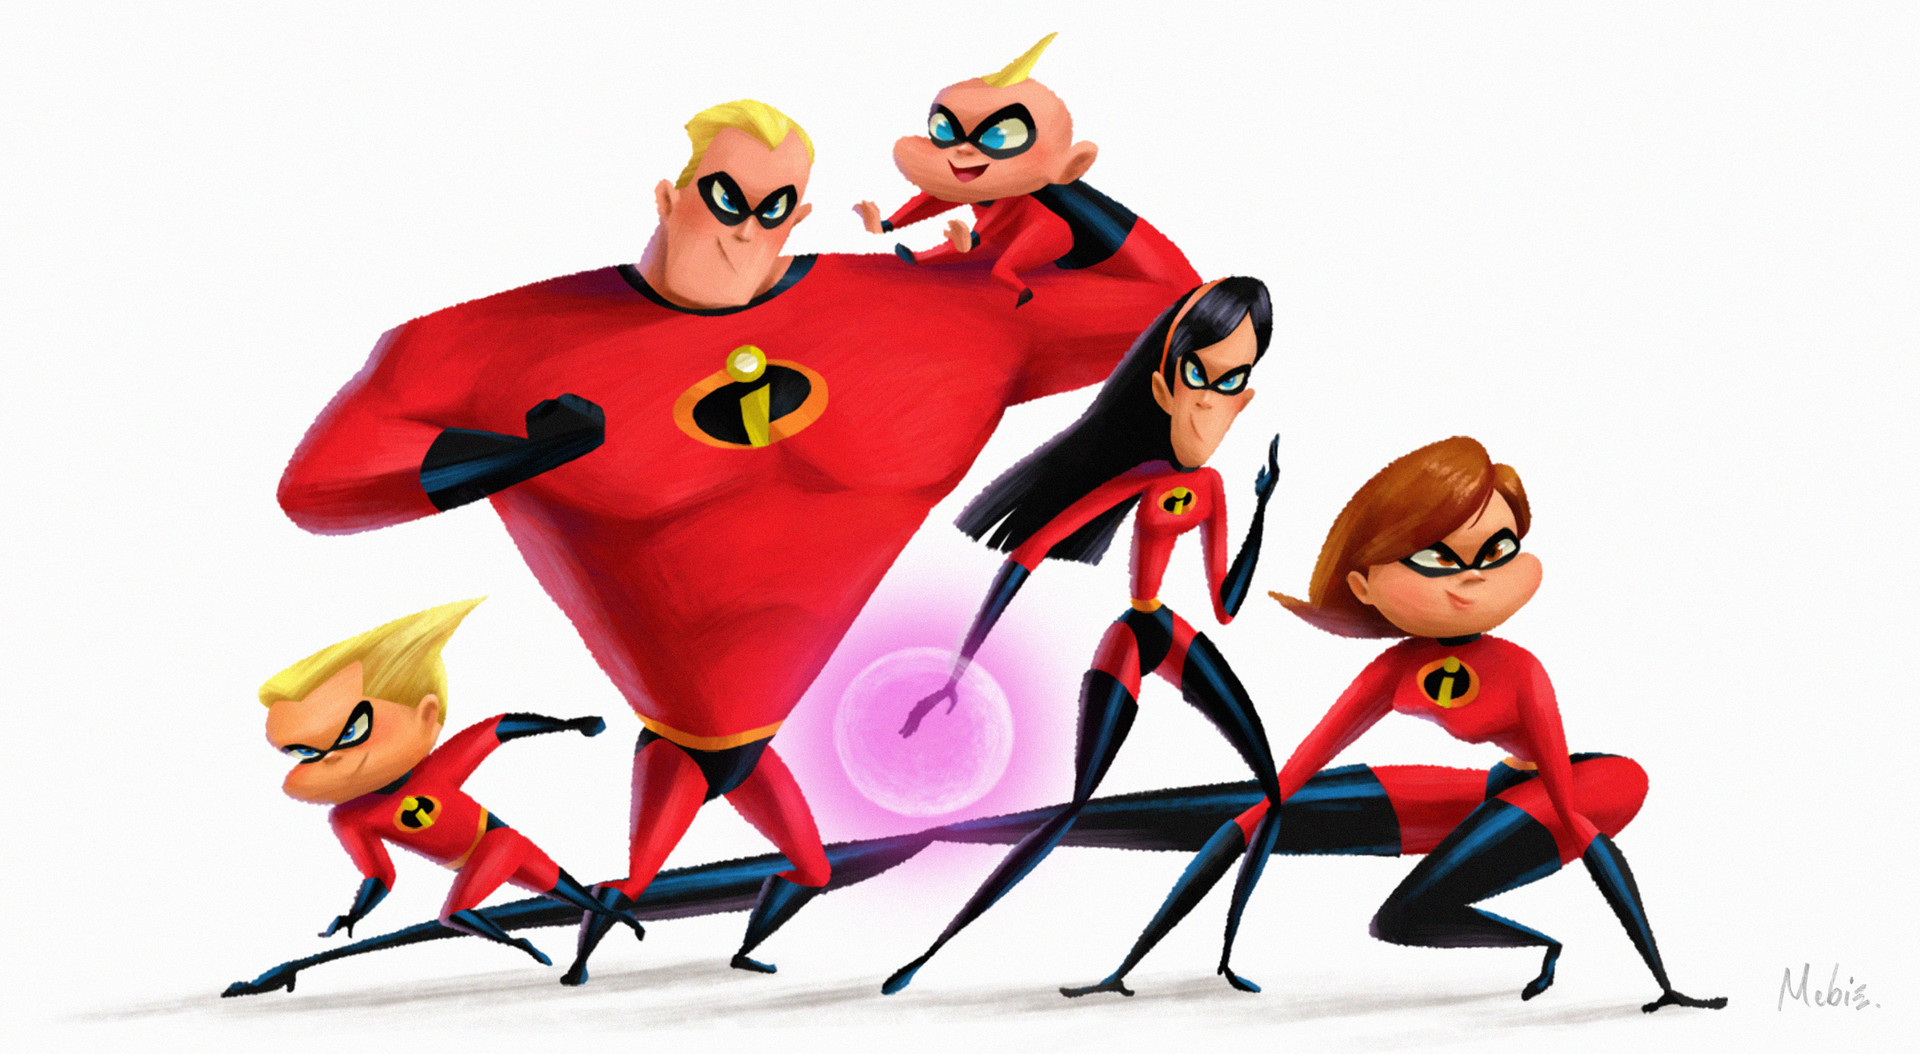 ArtStation - The Incredibles 2